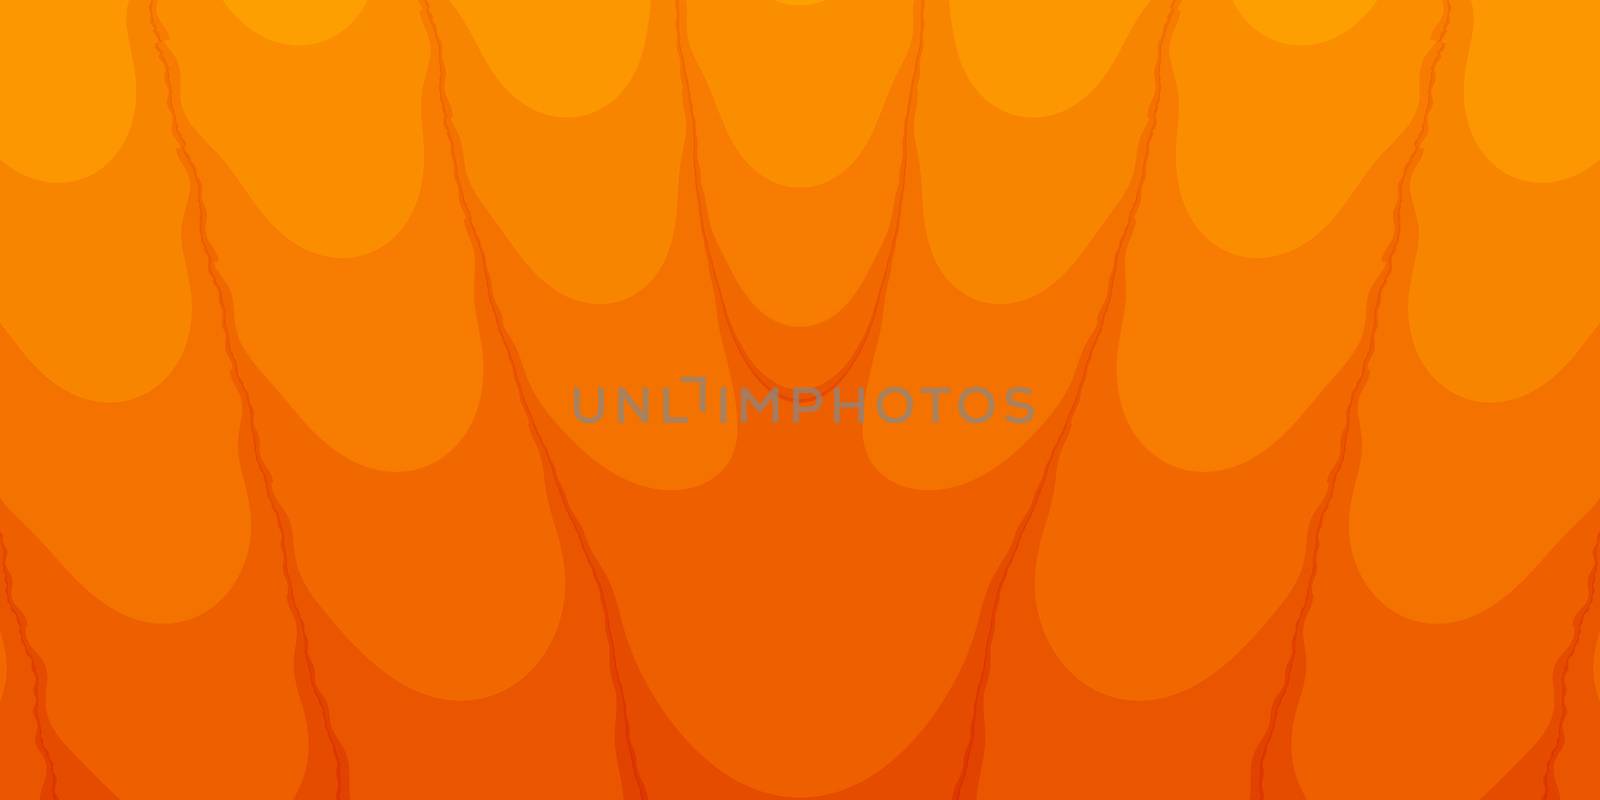 An abstract fractal design representing interweaving swirls in orange colors.